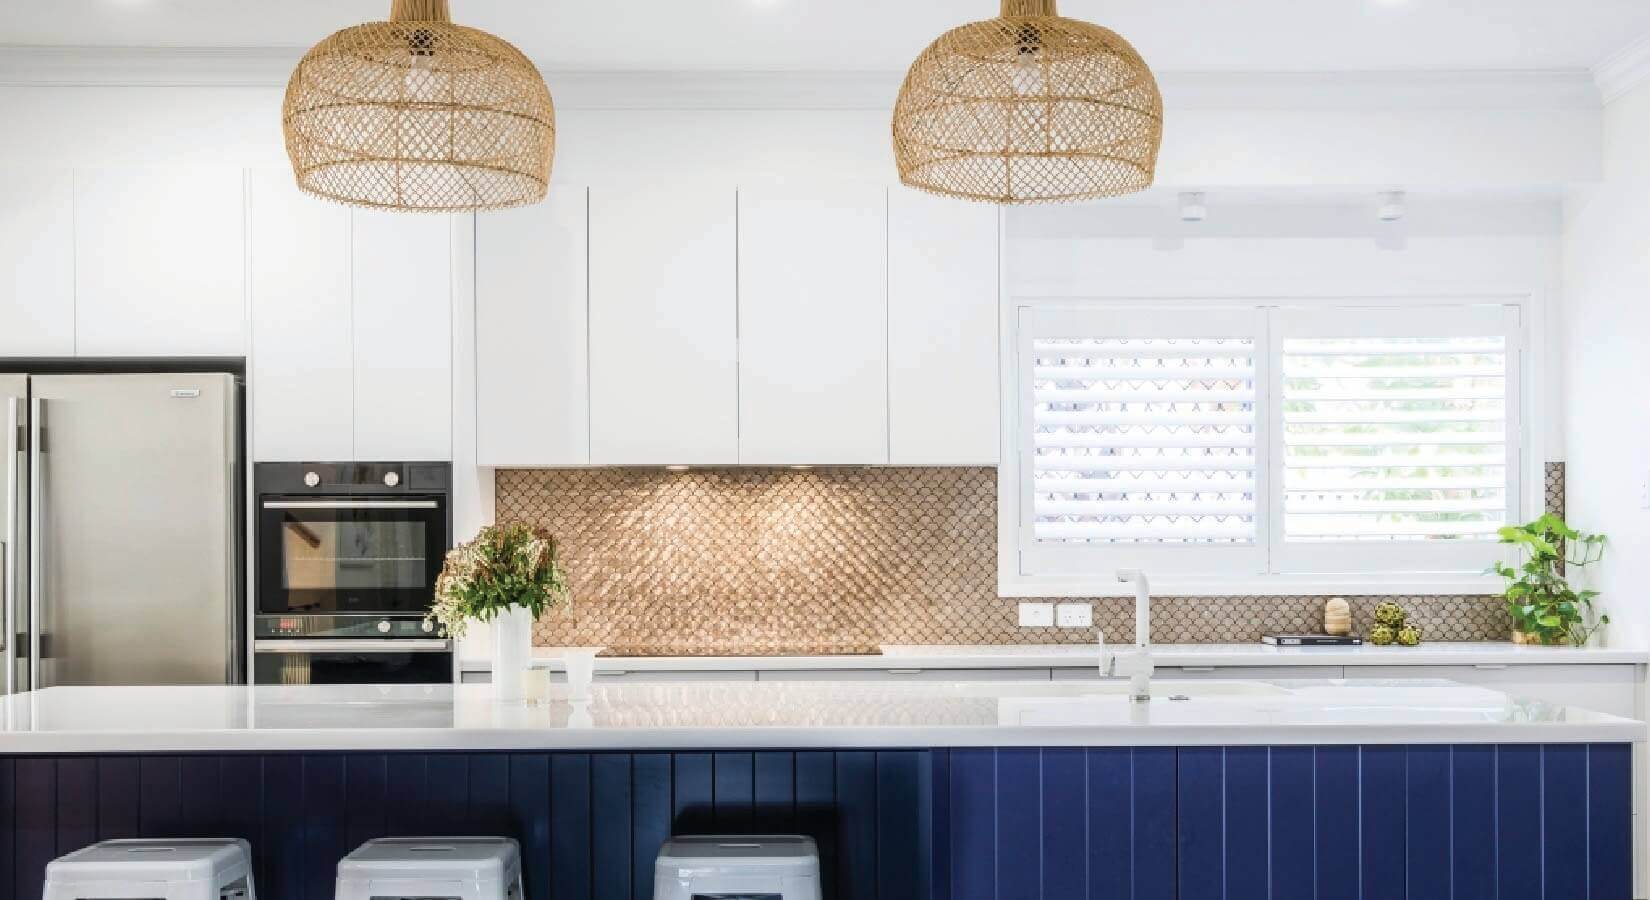 Kitchen with navy blue island with rattan light fixtures and copper backsplash.